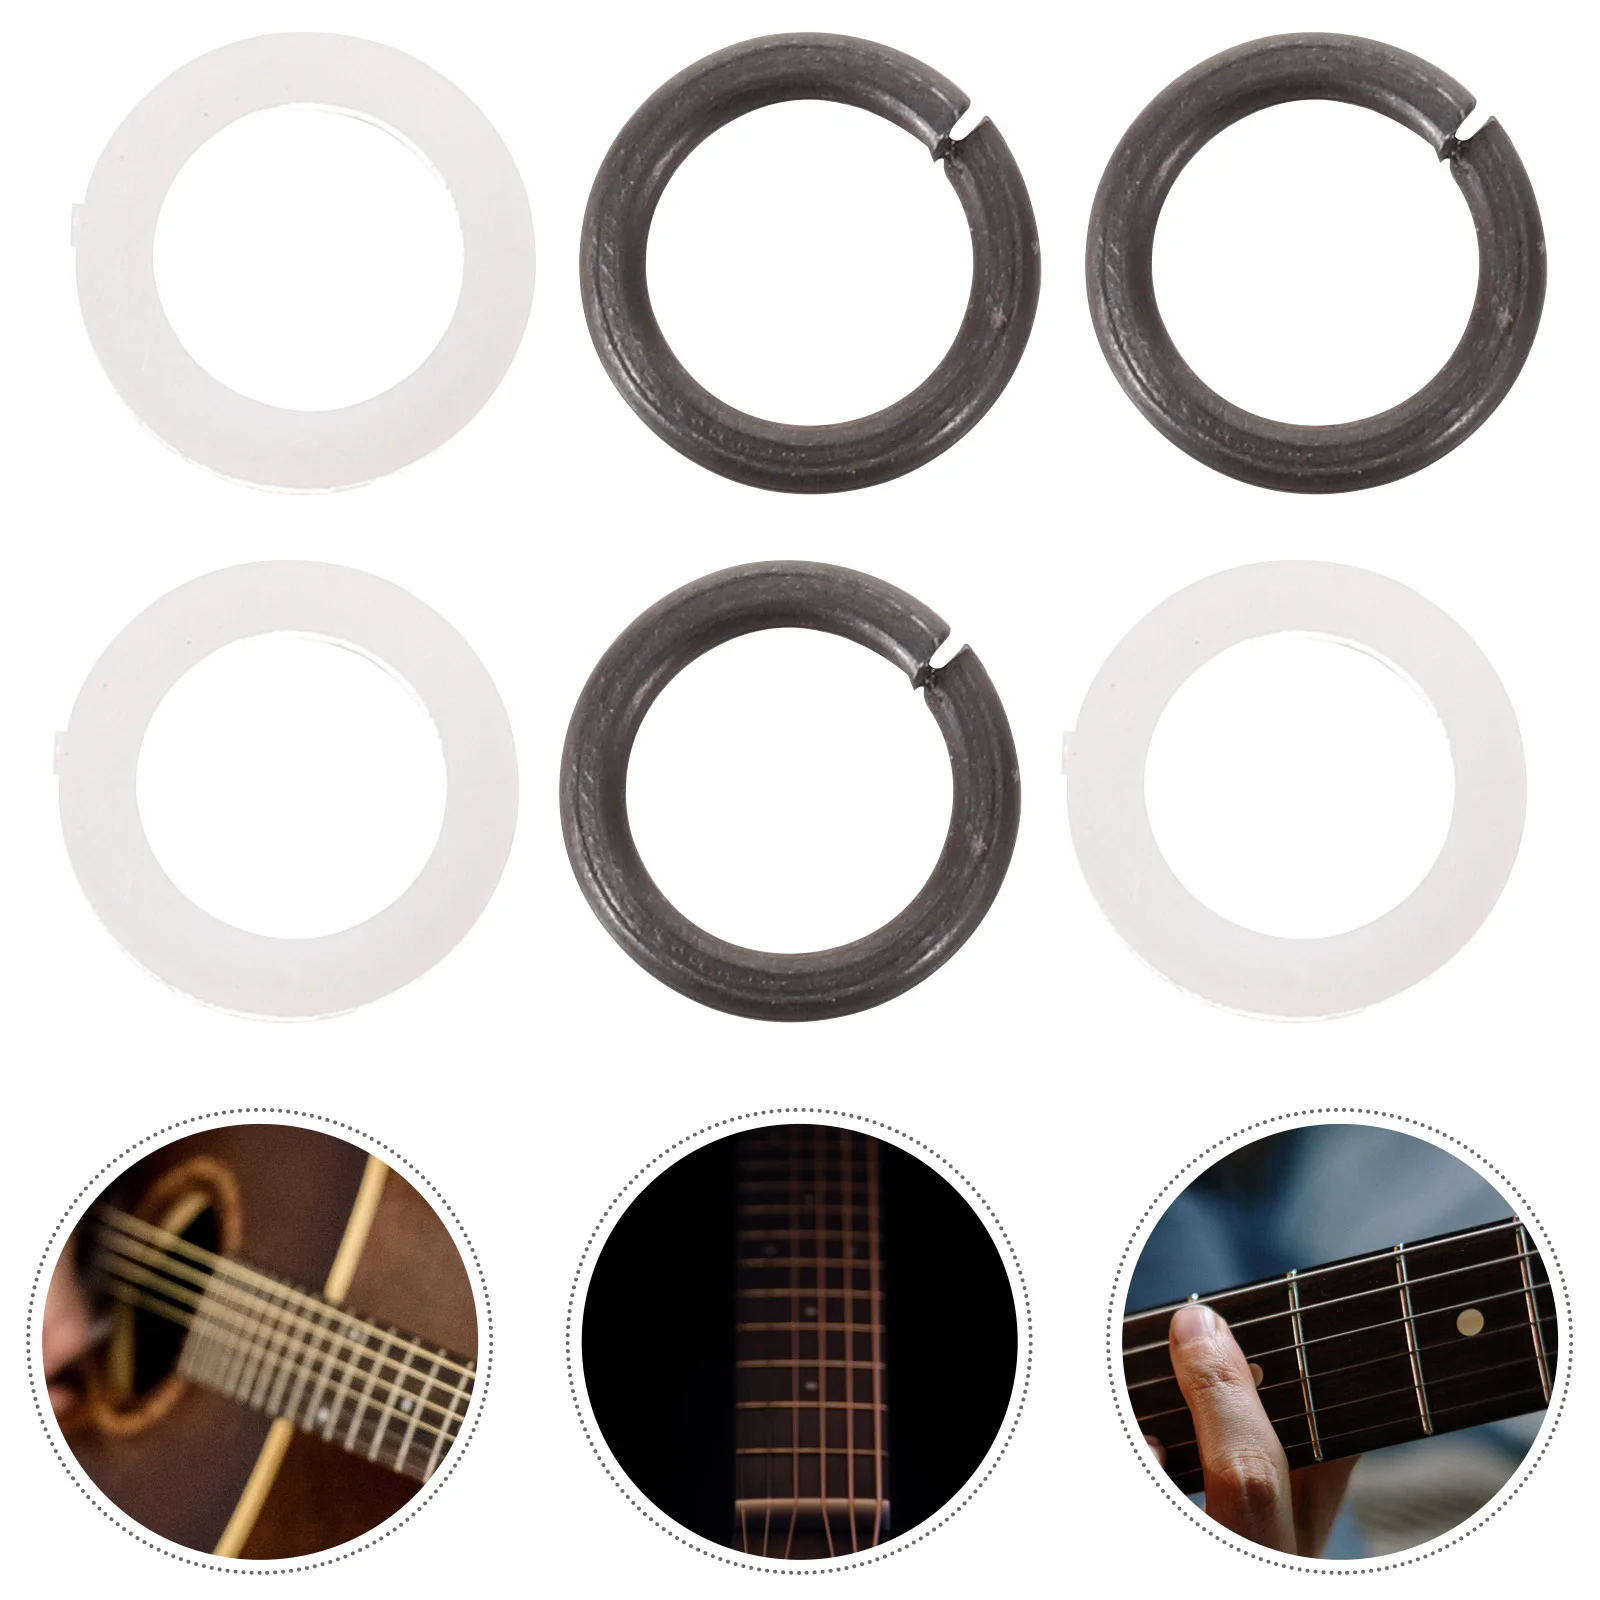 

10 Pairs Guitar Peg Spacer Accesories Tuning Washer Gasket Electric Accessory Replaceable Supply Plastic Tuner Portable